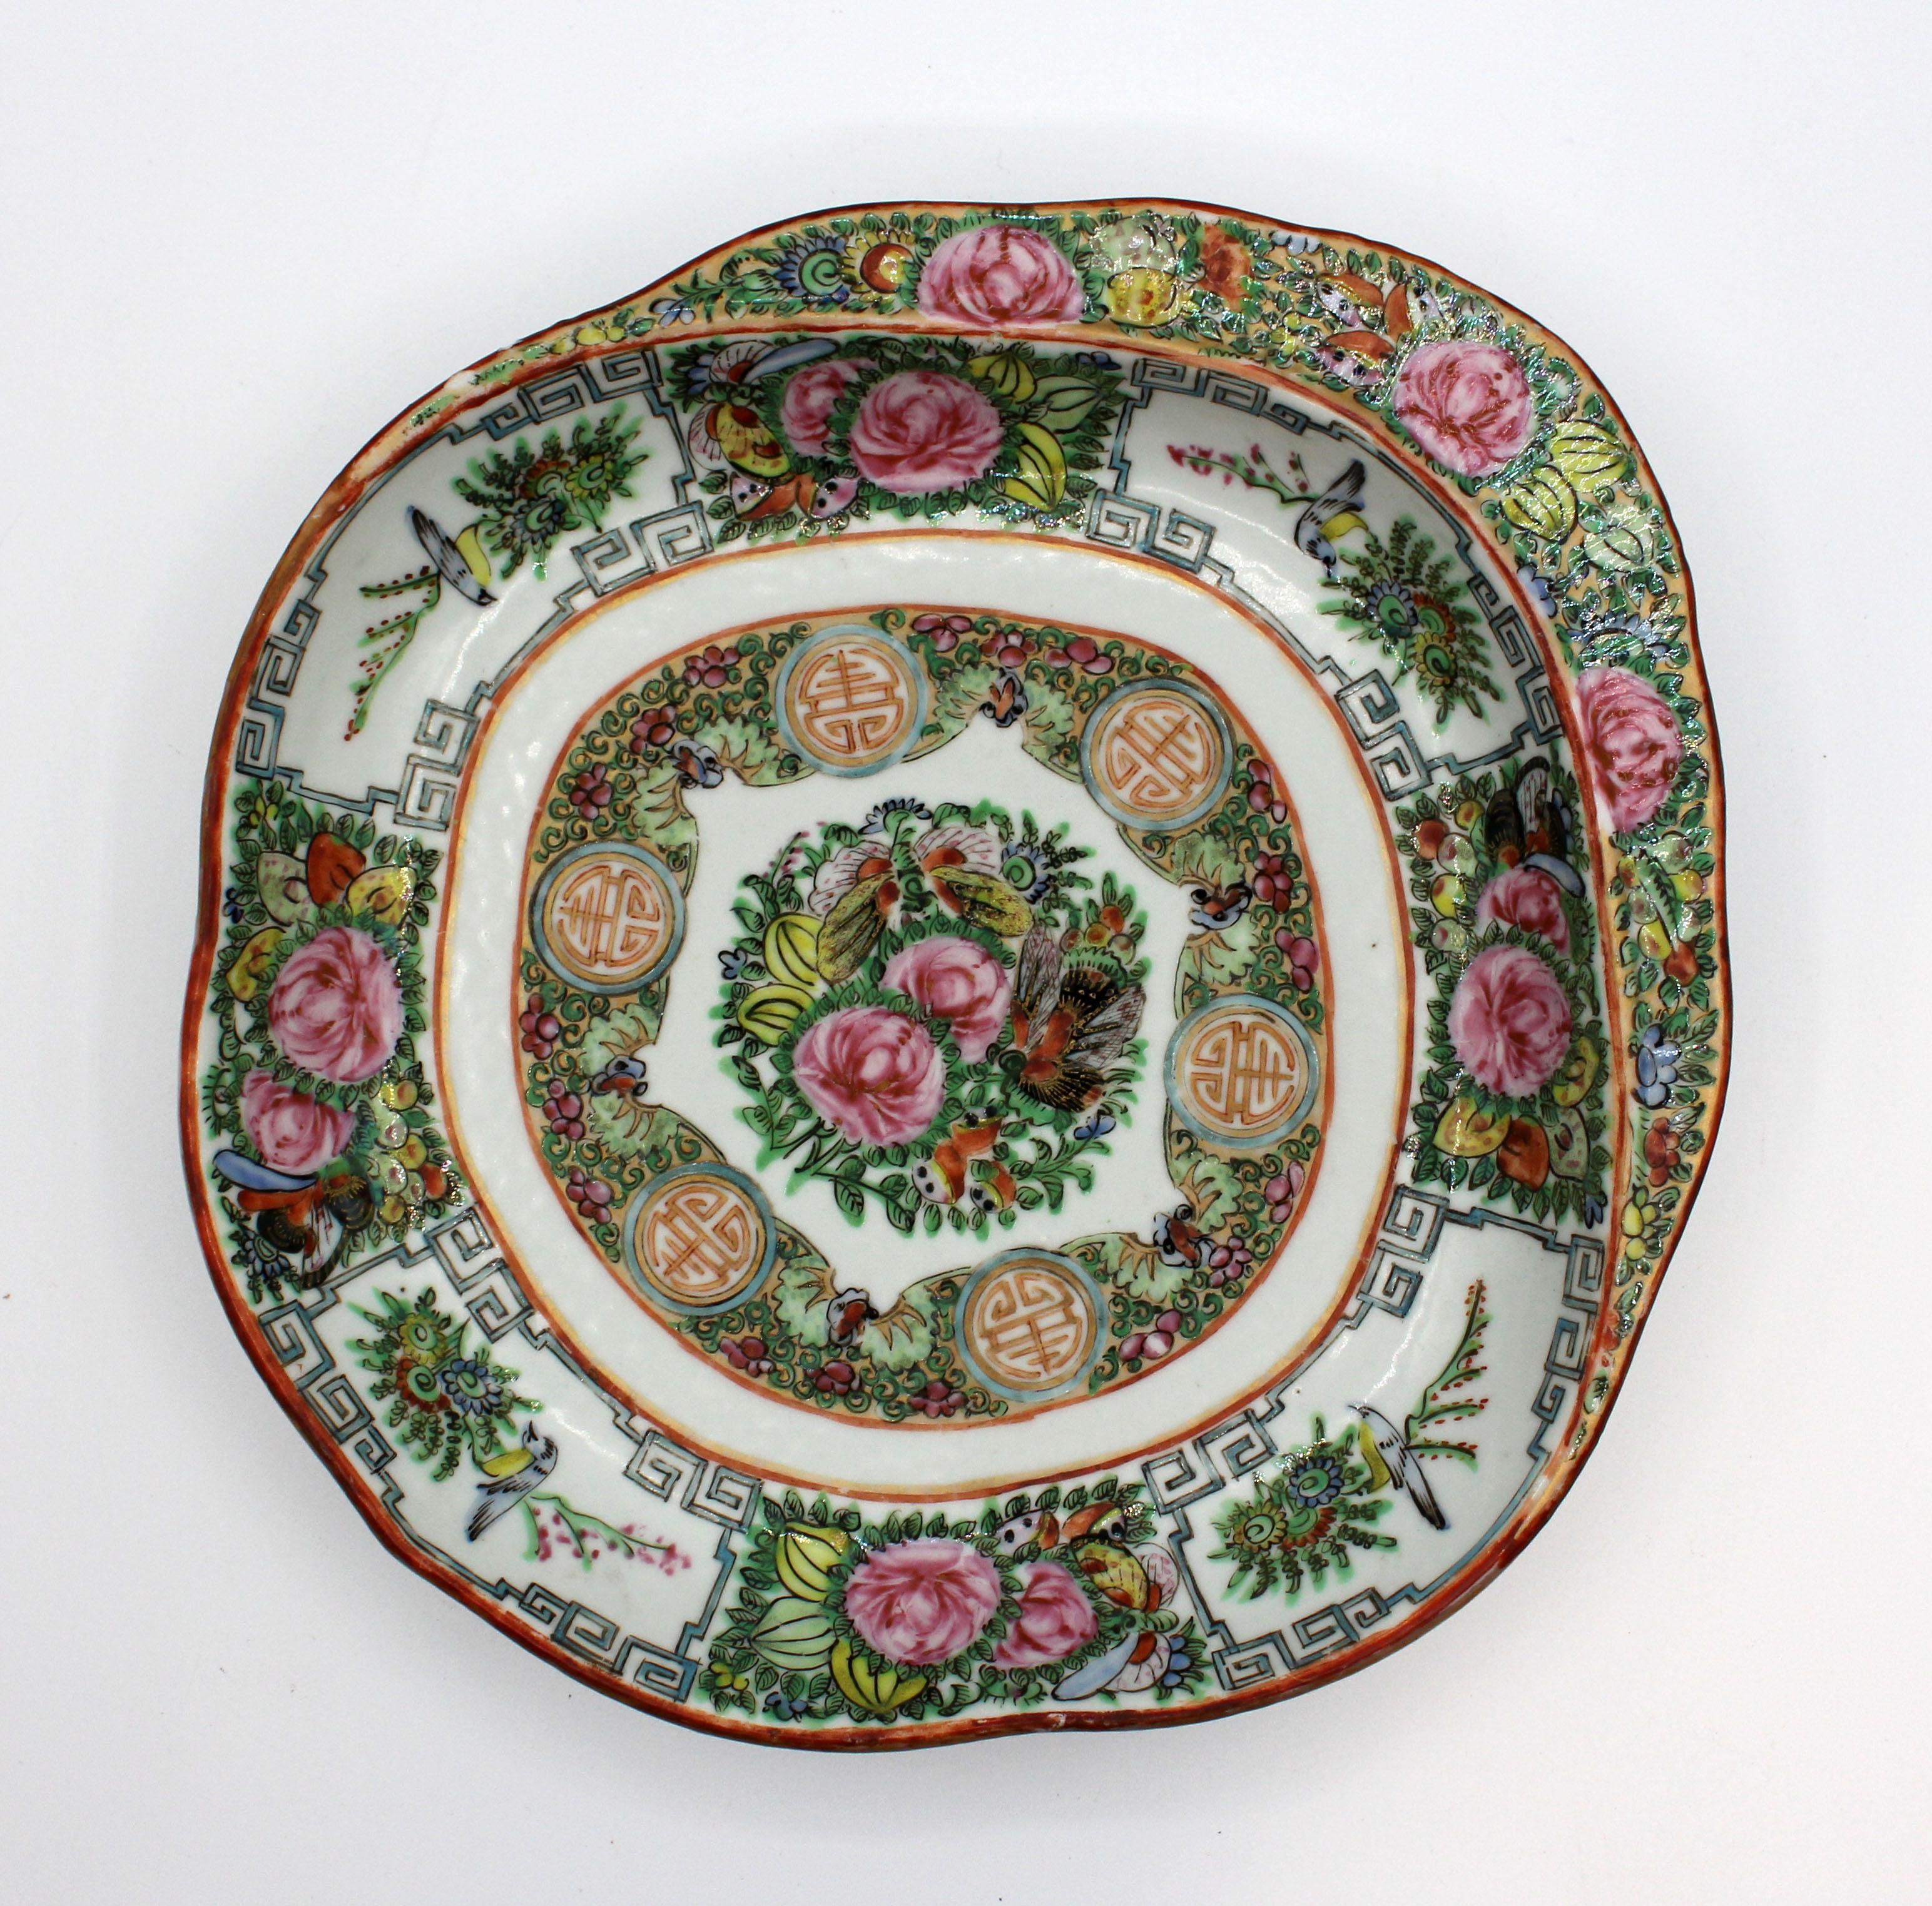 Qing Dynasty rose canton shrimp plate. Chinese export porcelain. Later Republic era mark. Orange peel body. Very well hand painted & gilded typical of earlier work. Measures: 10 1/2